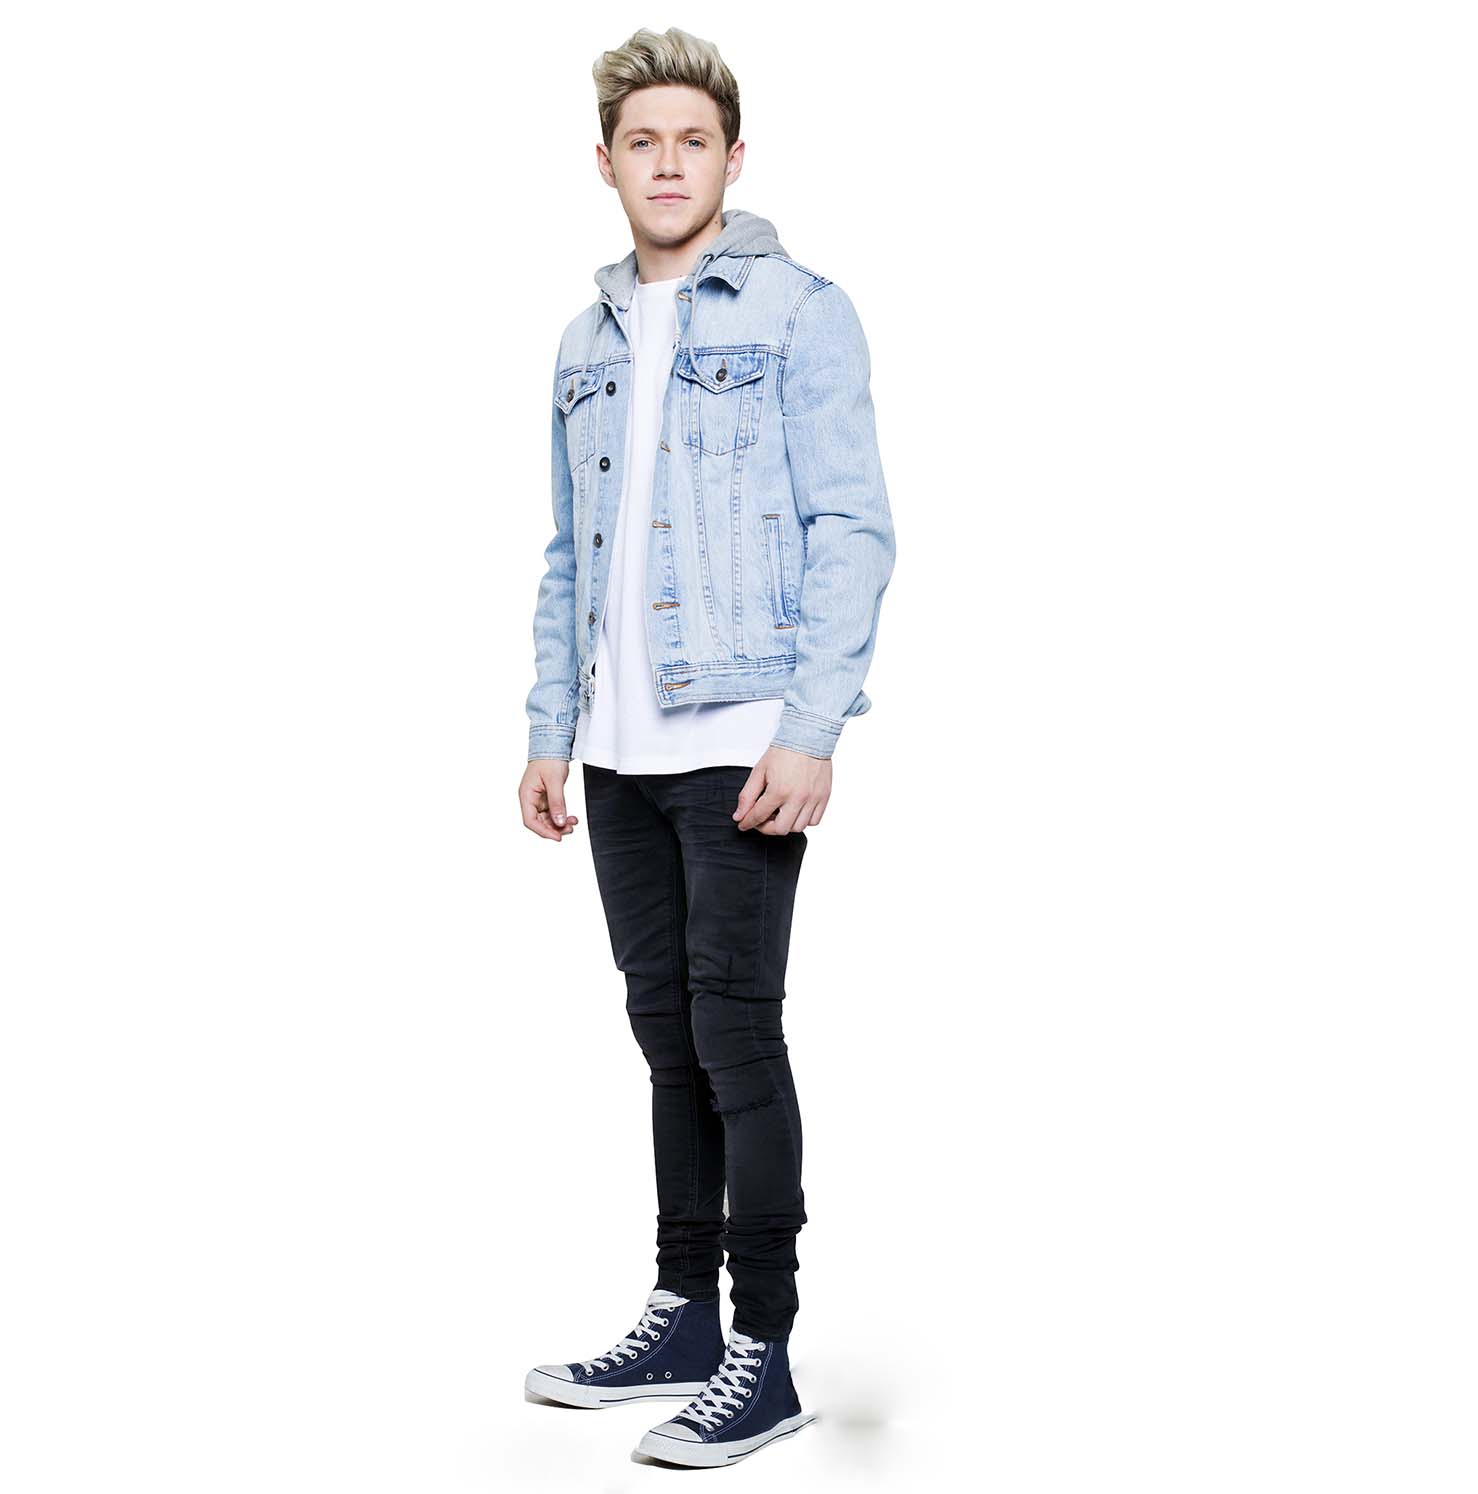 Niall Horan New Wallpaper Best Picture HD 1080p